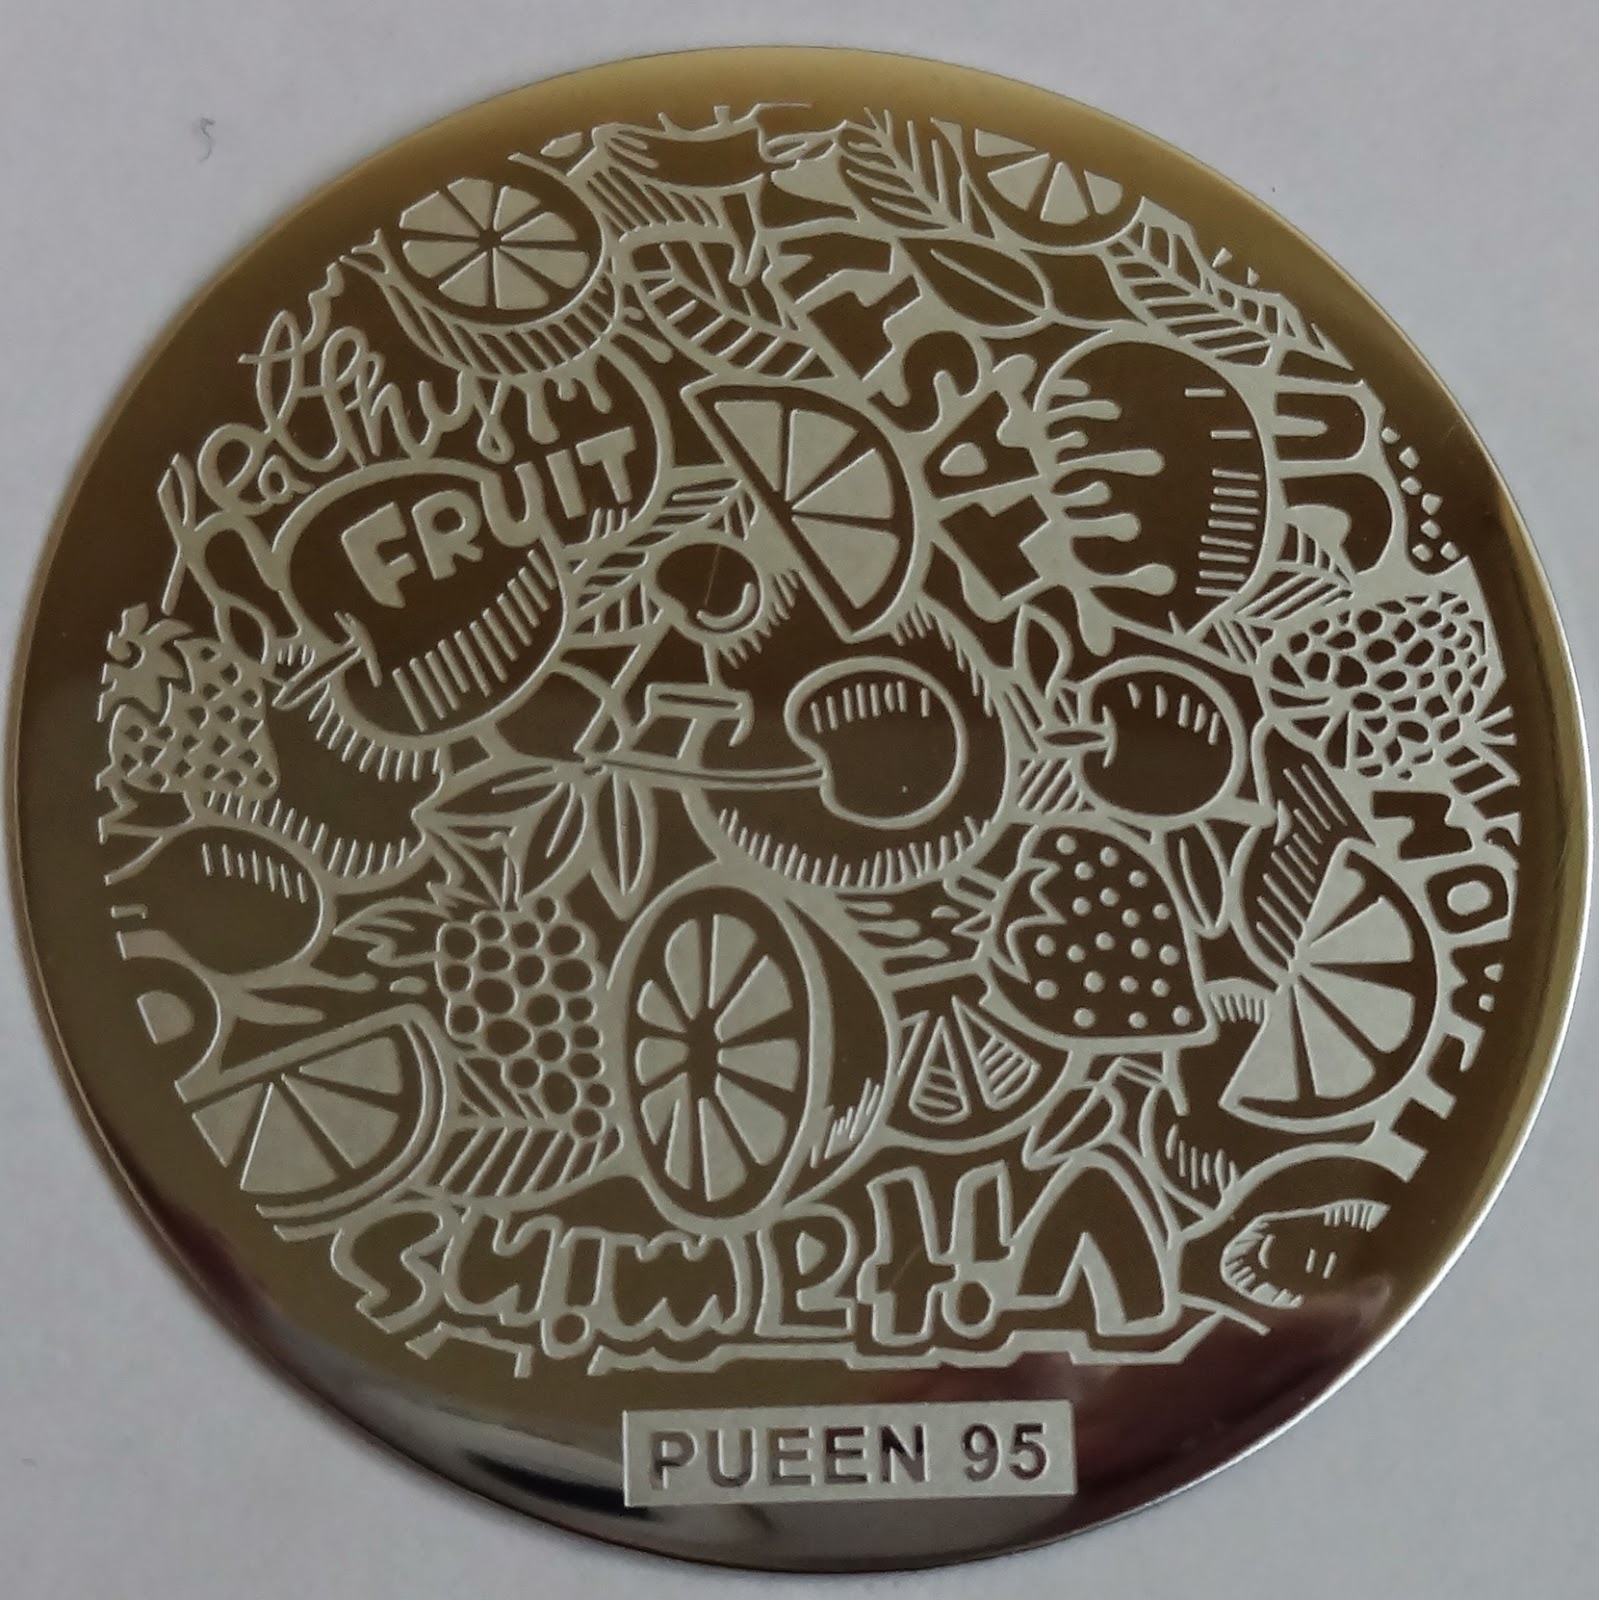 Pueen Stamping Plates